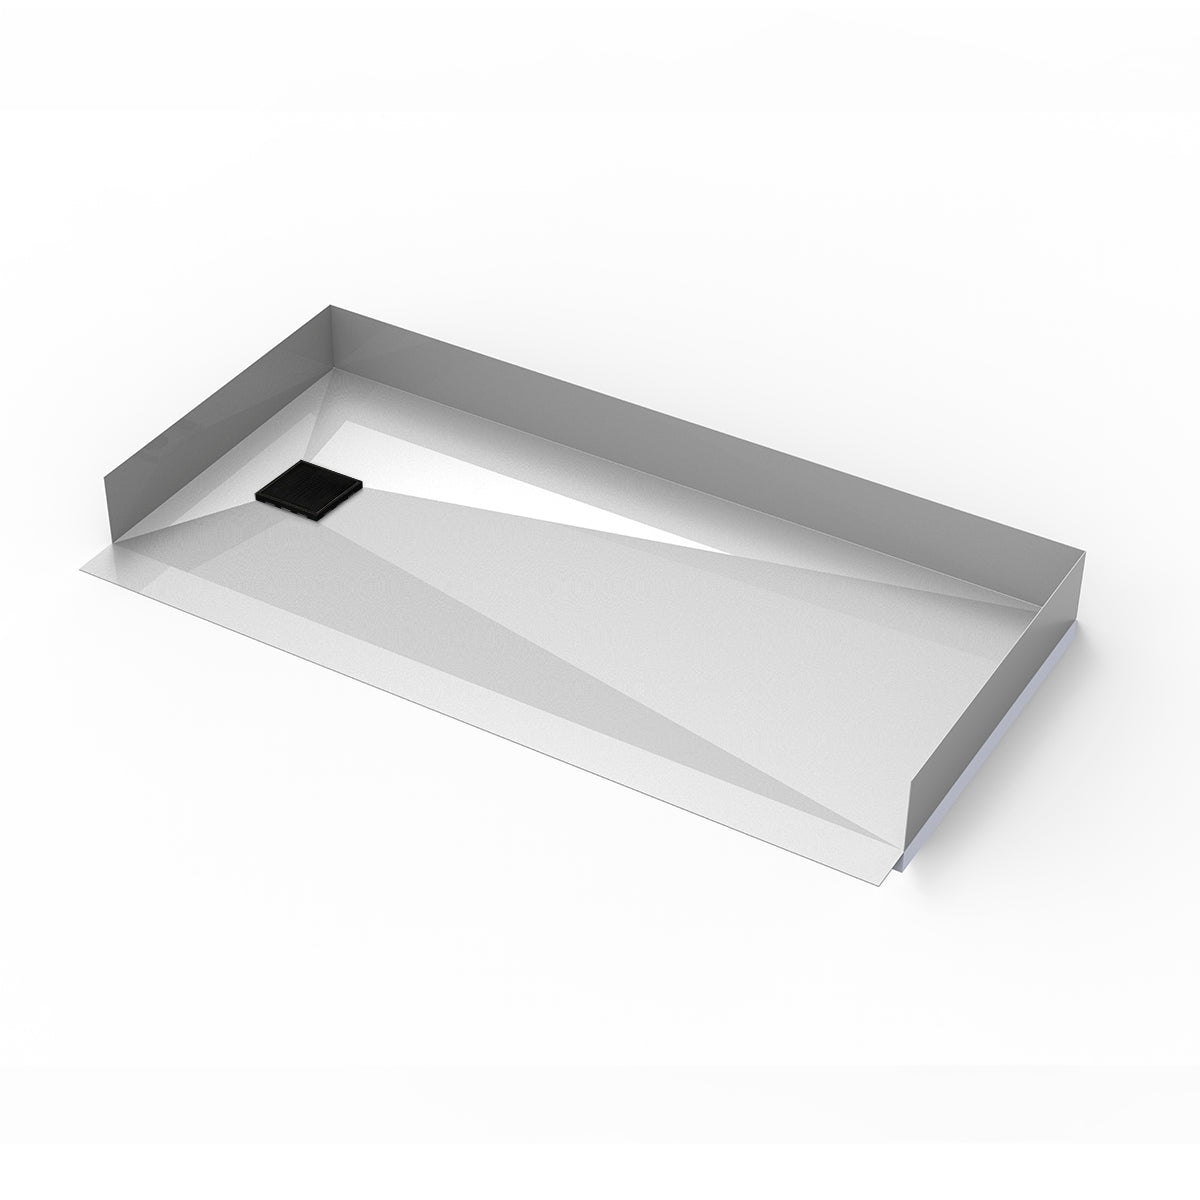 Infinity Drain 30"x 60" Curbless Stainless Steel Shower Base with Wedge Wire Left Drain location